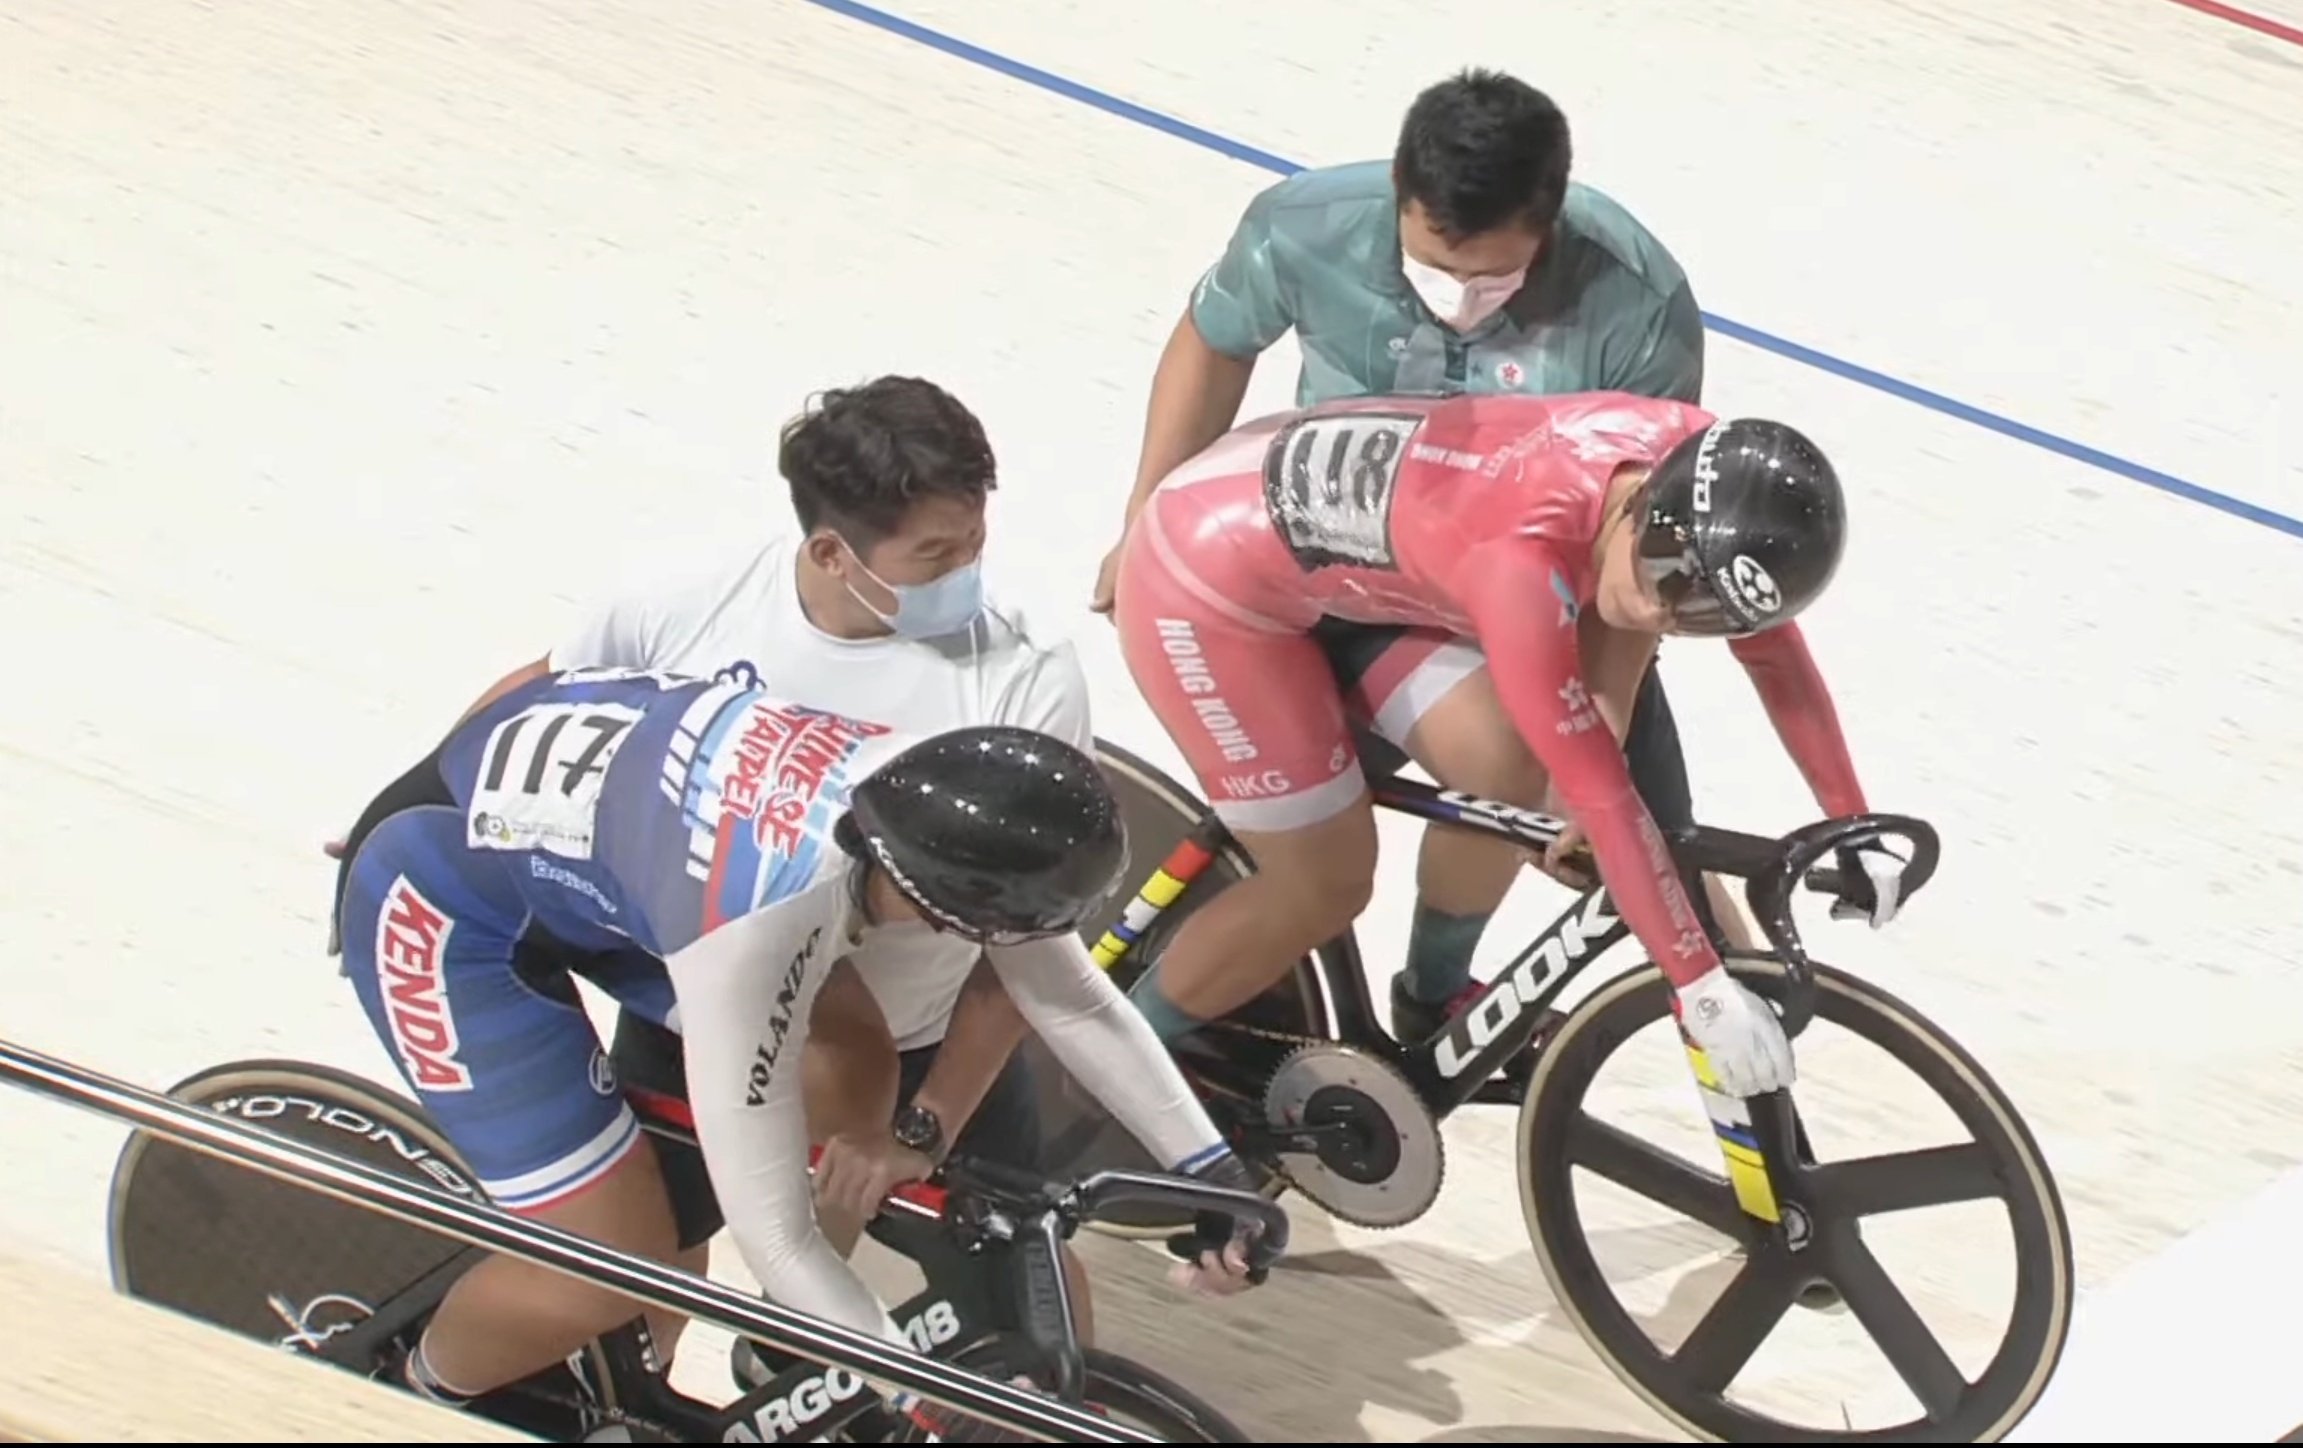 Sarah Lee lines up for the sprint final in the JICF International Track Cup in Chiba. Photo: Handout